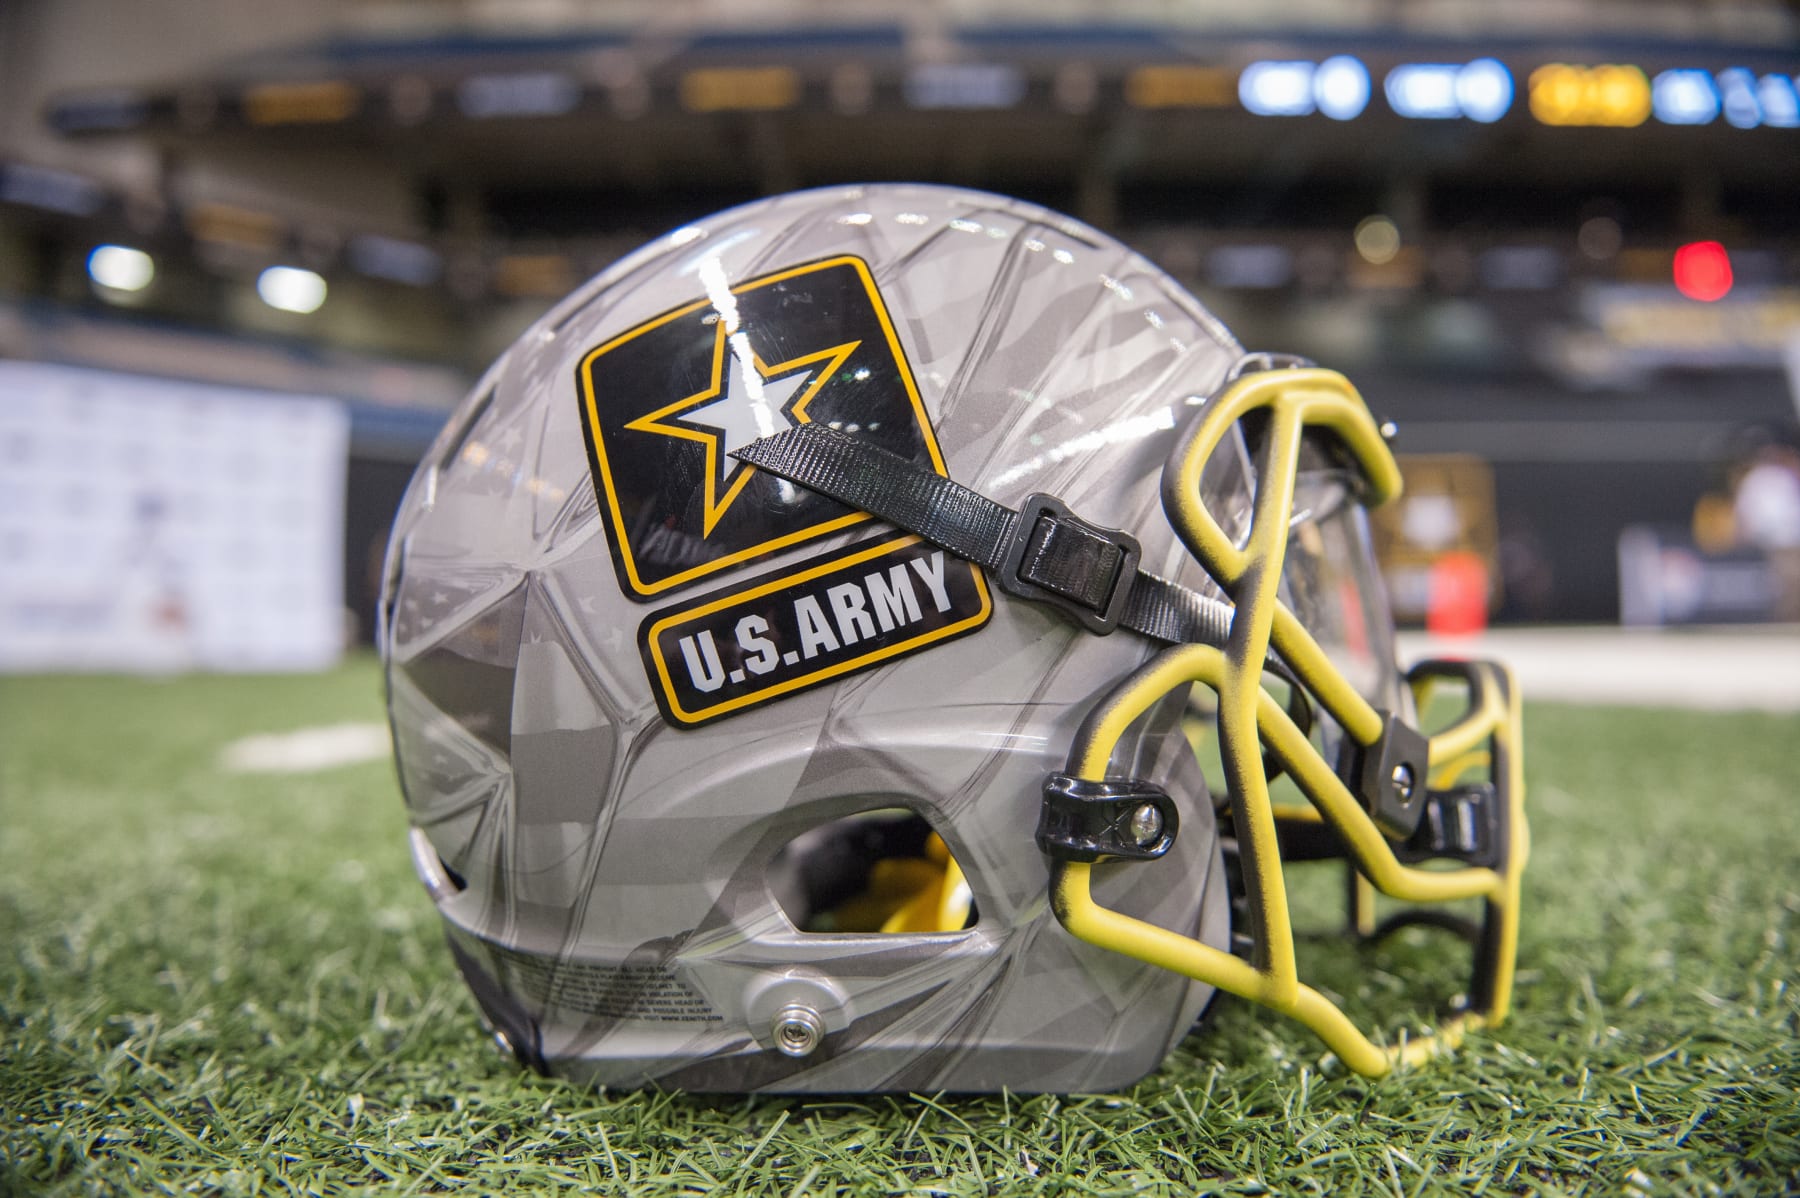 DVIDS - Images - US Army All-American Bowl - New uniforms [Image 4 of 11]